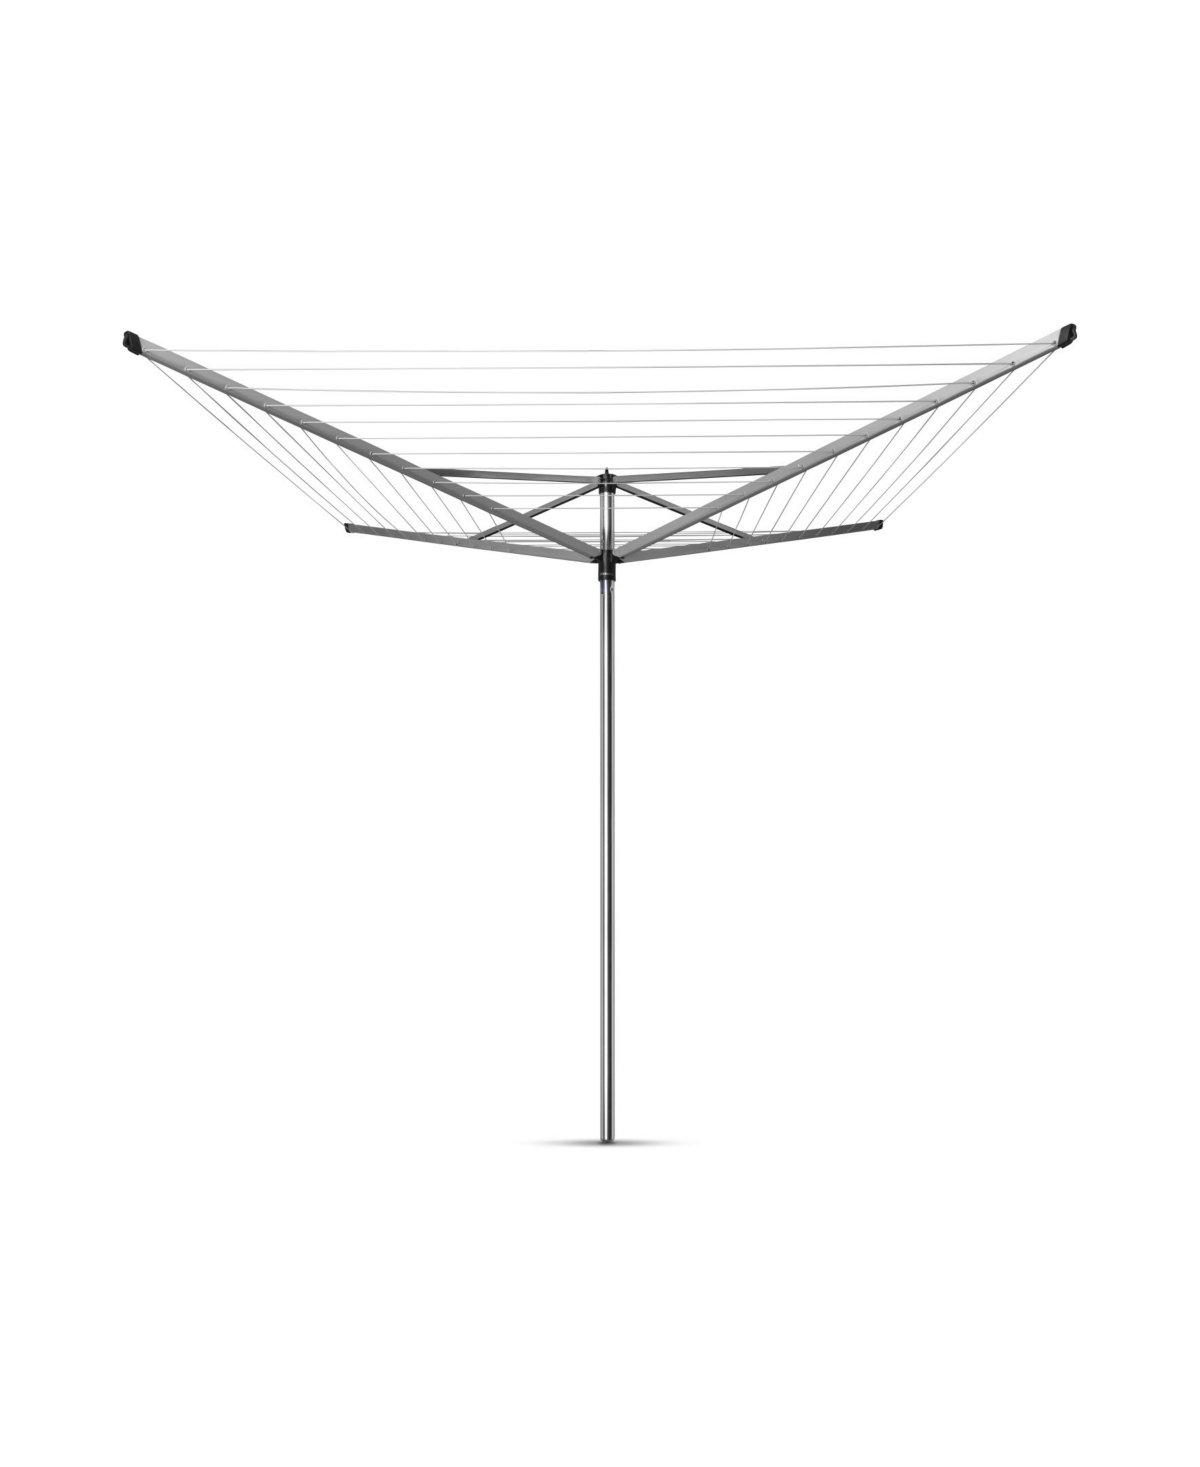 Topspinner Clothesline 197' with Ground Spike - Silver